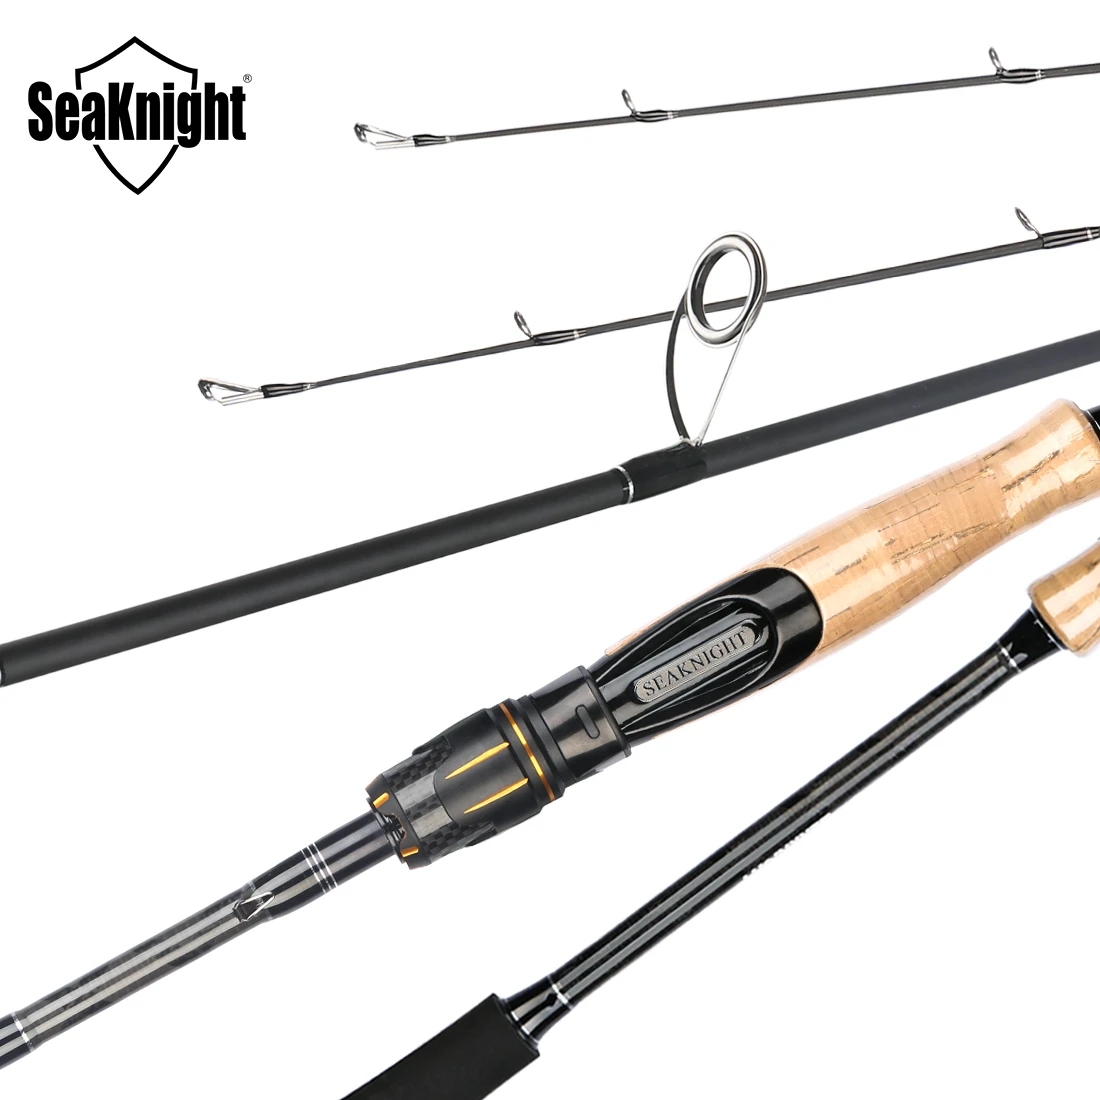 SeaKnight Brand Falcon II Series Fishing Rod 1.98m 2.1m 2.4m UL/L/ML/M/MH/H/XH Double-tip Carbon Lure Rod Spinning/Casting 1-80g